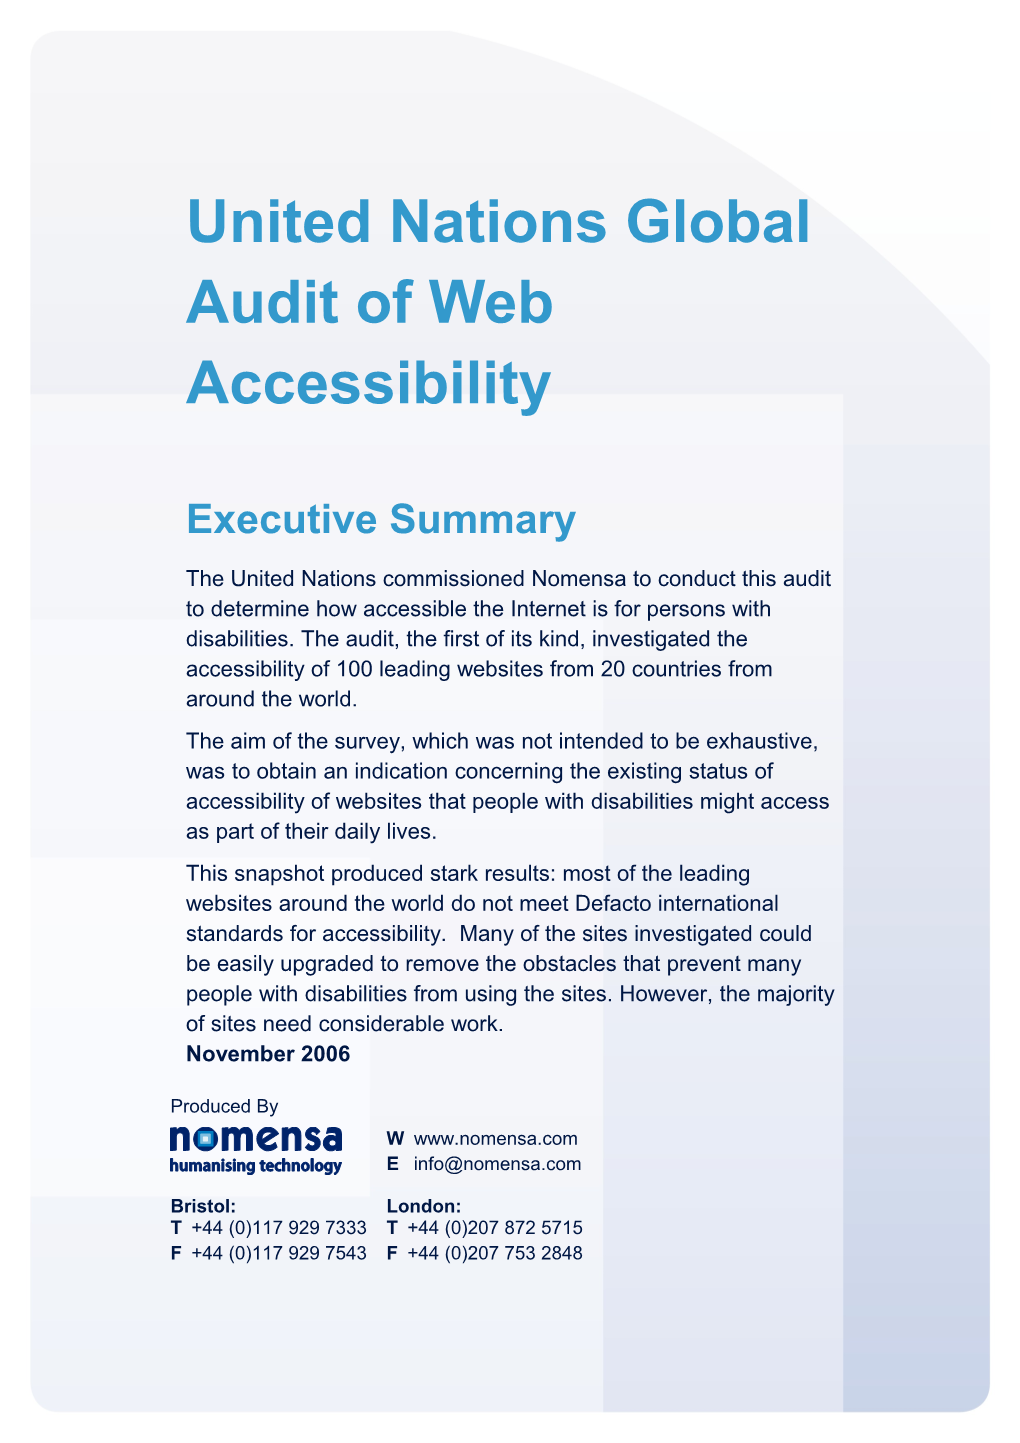 United Nationsglobal Audit of Web Accessibility